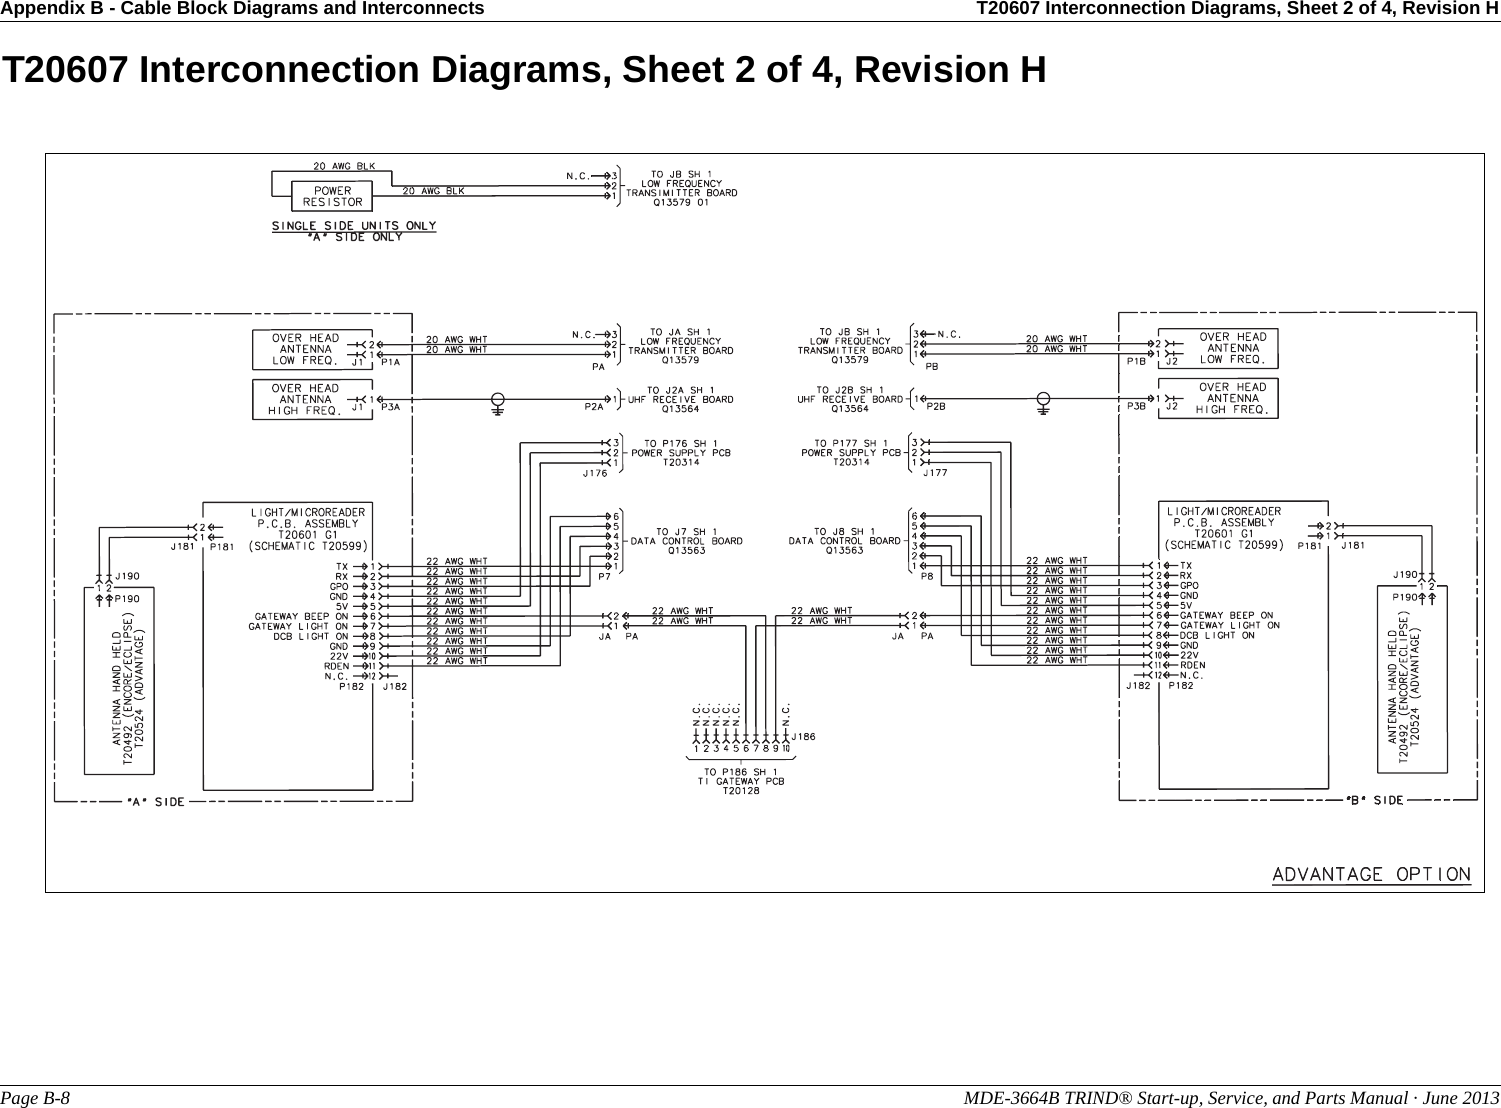 Appendix B - Cable Block Diagrams and Interconnects T20607 Interconnection Diagrams, Sheet 2 of 4, Revision HPage B-8                                                                                                               MDE-3664B TRIND® Start-up, Service, and Parts Manual · June 2013T20607 Interconnection Diagrams, Sheet 2 of 4, Revision H